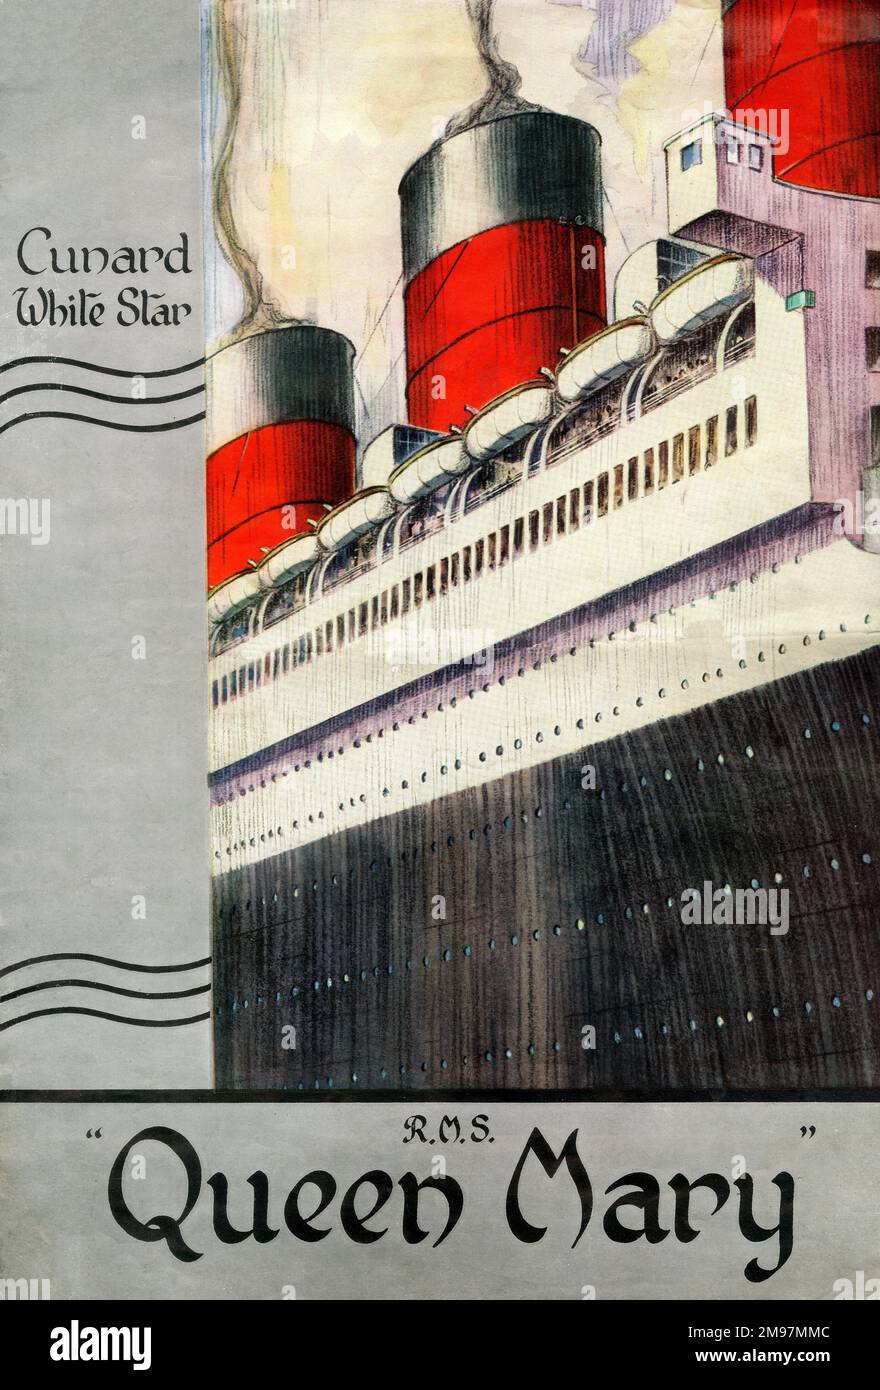 Brochure for the Cunard White Star Luxury Liner RMS Queen Mary. Stock Photo